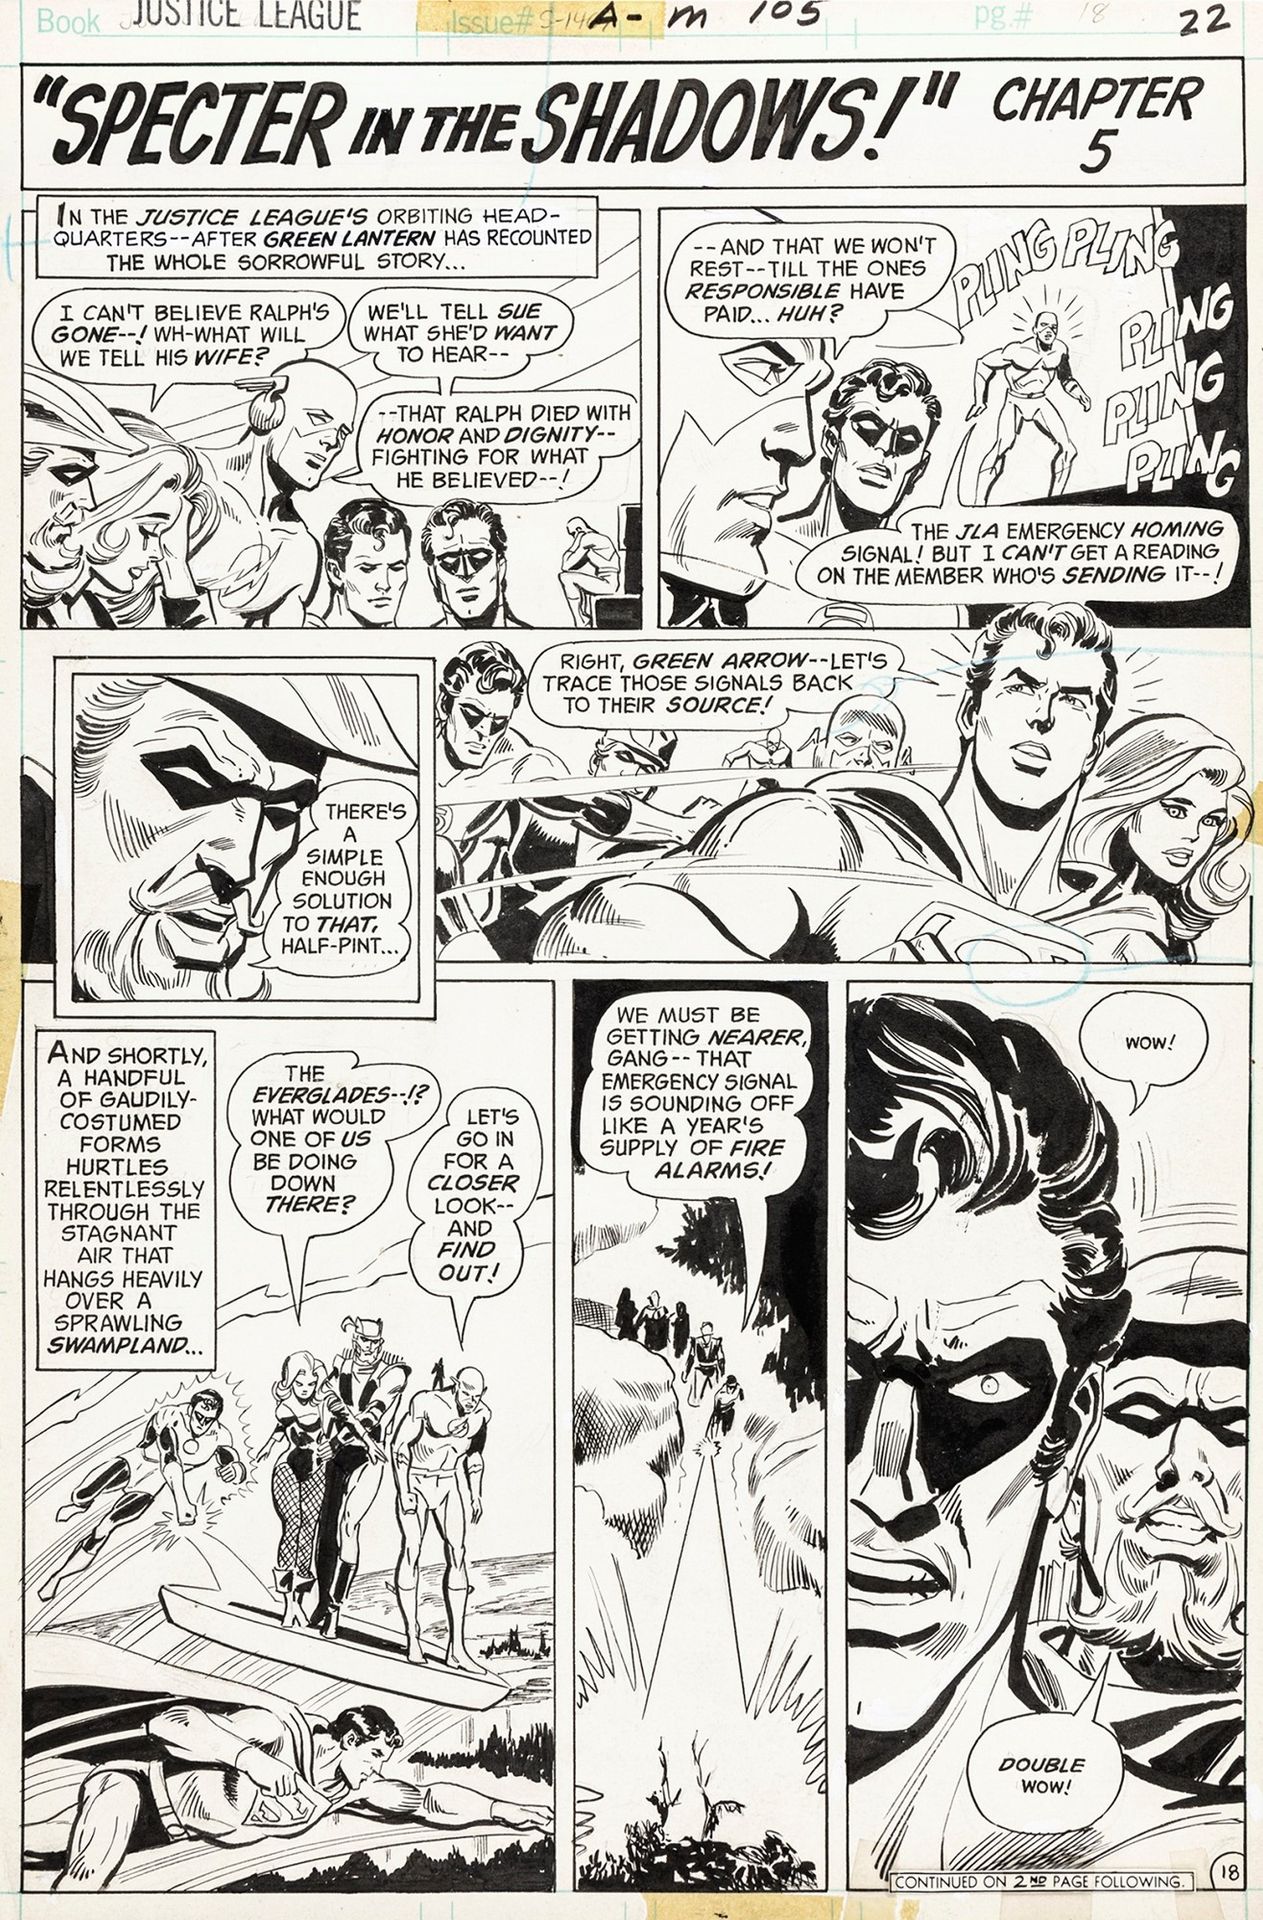 Dick Dillin Justice League of America - Specter in the Shadows!, 1973

pencil an&hellip;